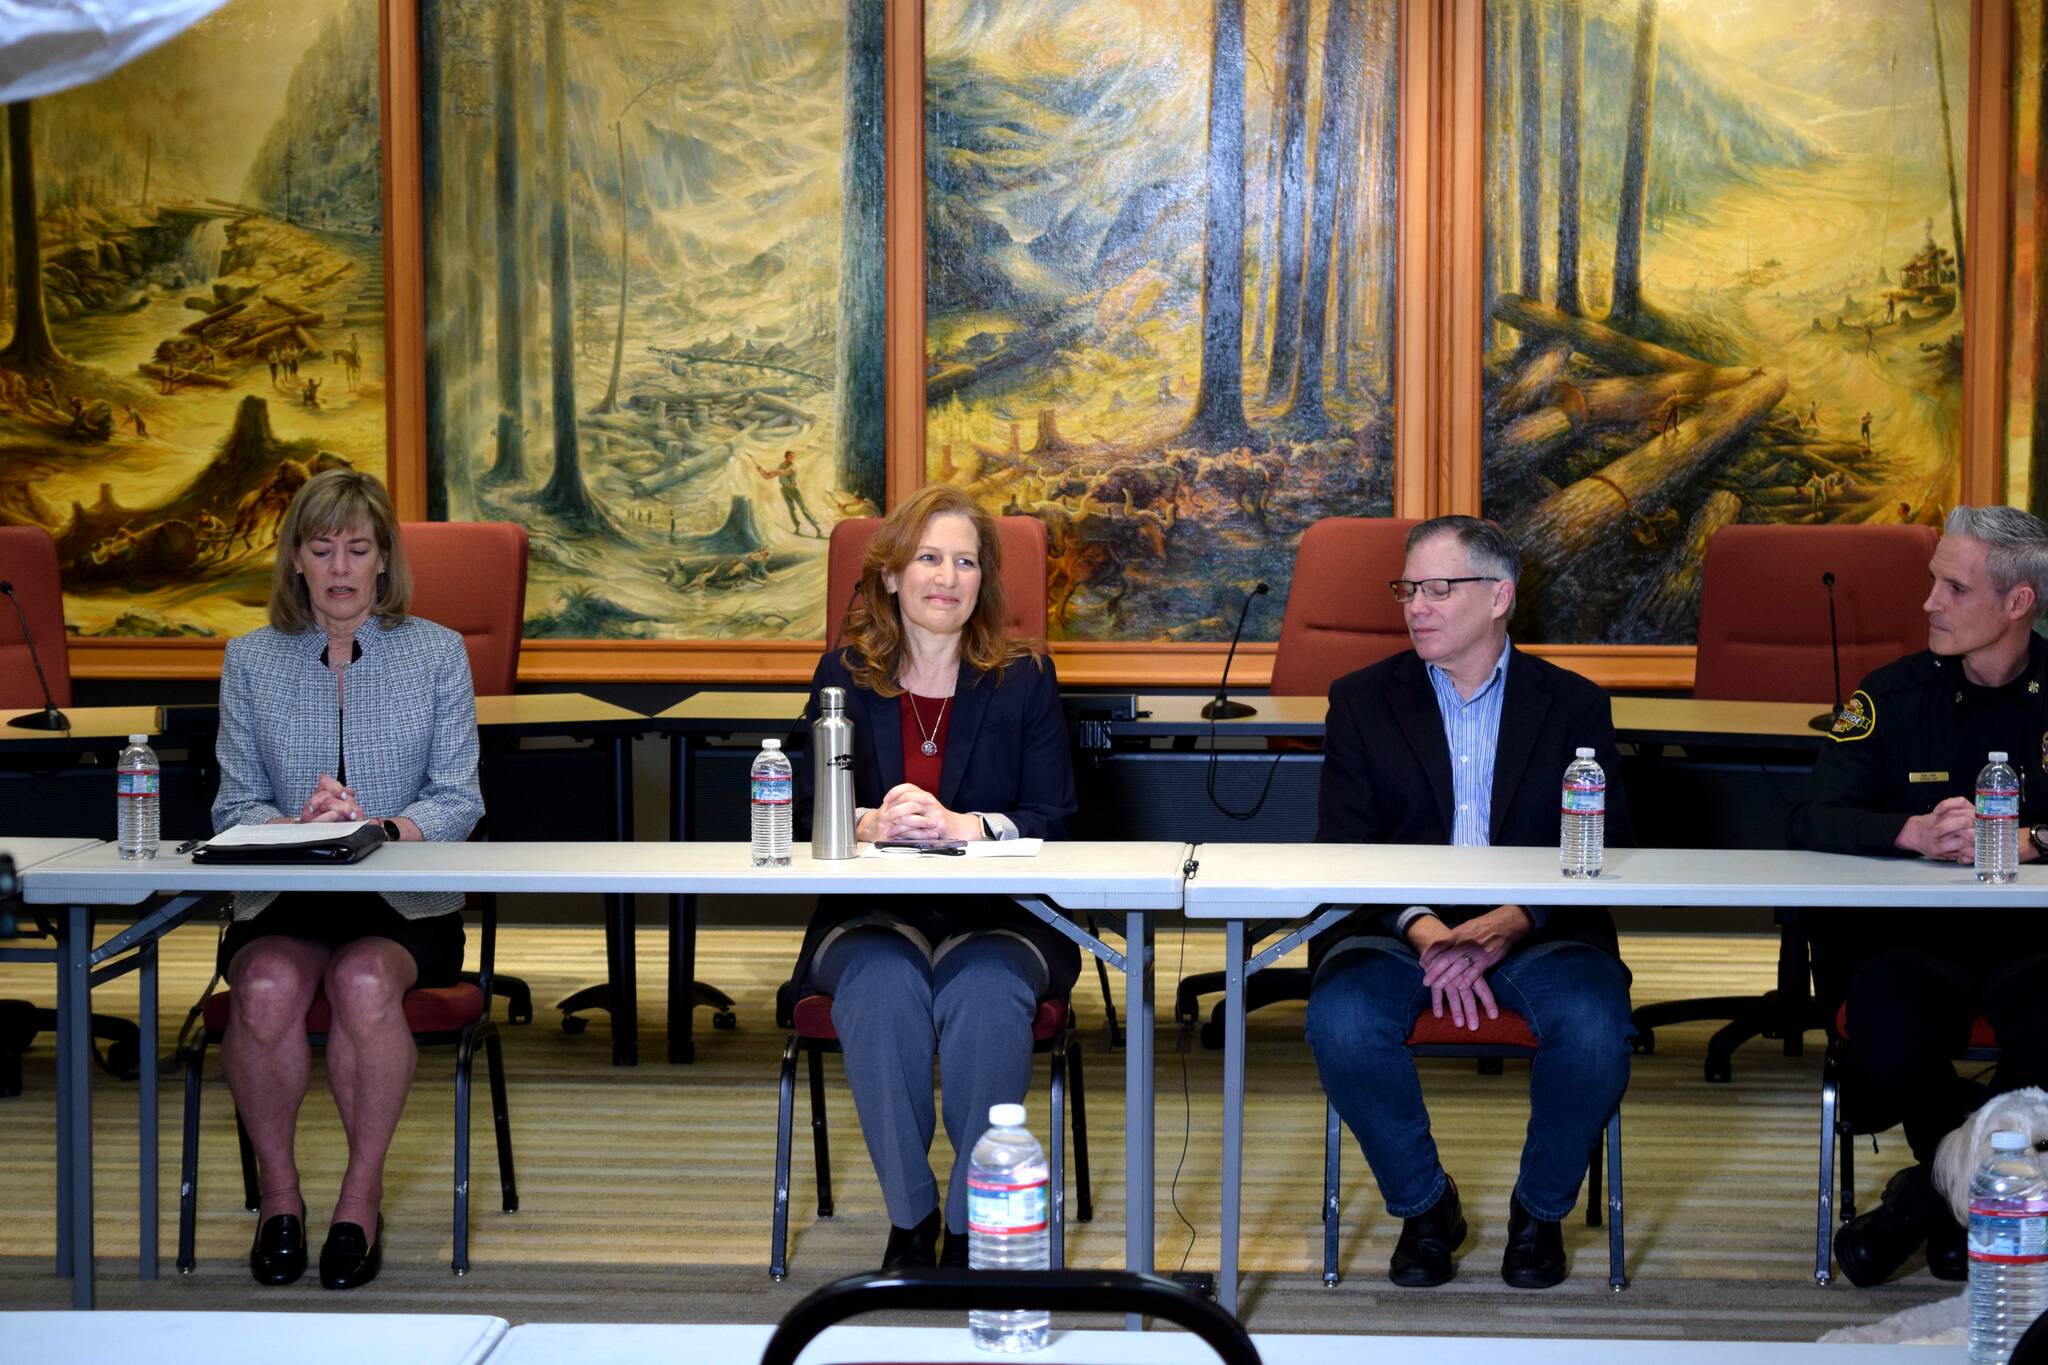 Photo by Conor Wilson/Valley Record
Federal, state and local leaders talk about State Route 18 at a roundtable discussion March 23 at Snoqualmie City Hall. From left: Snoqualmie Mayor Katherine Ross, U.S. Rep. Kim Schrier, State Rep. Bill Ramos, Eastside Fire Rescue Assistant Chief Ben Lane.